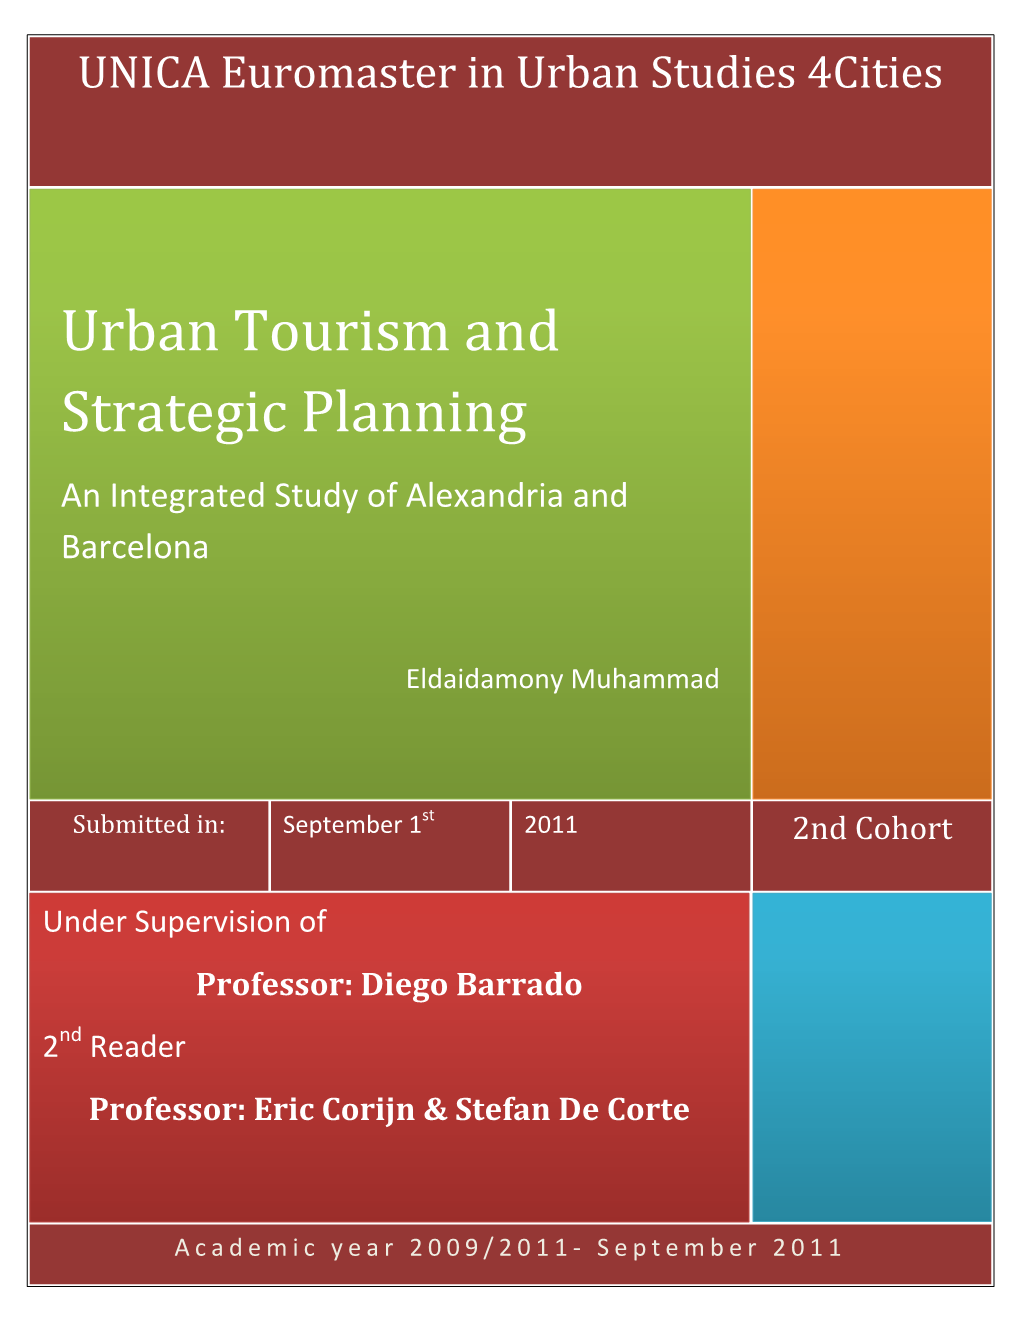 Urban Tourism and Strategic Planning an Integrated Study of Alexandria and Barcelona